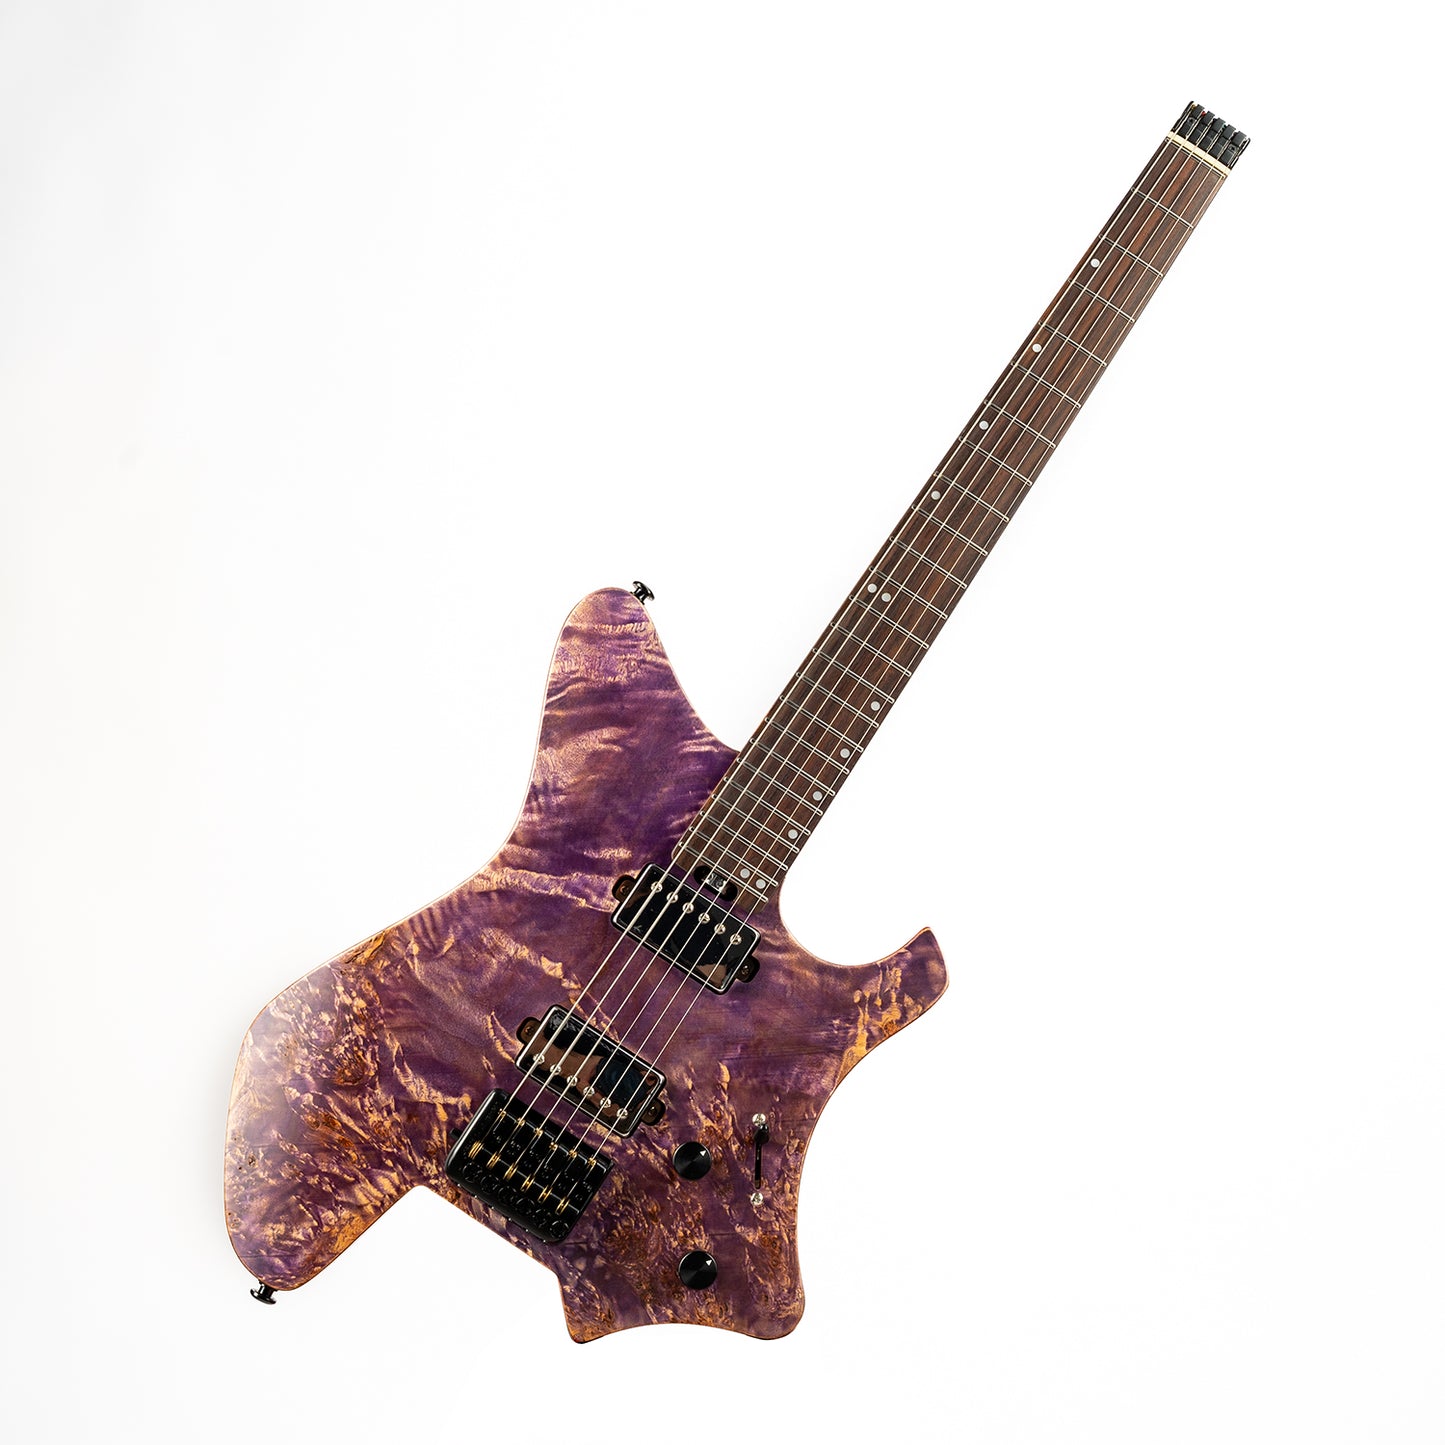 Eart Guitars, GW2 Solid Body Headless Electric Guitars, Right Handed Model Satin Finish , Purple